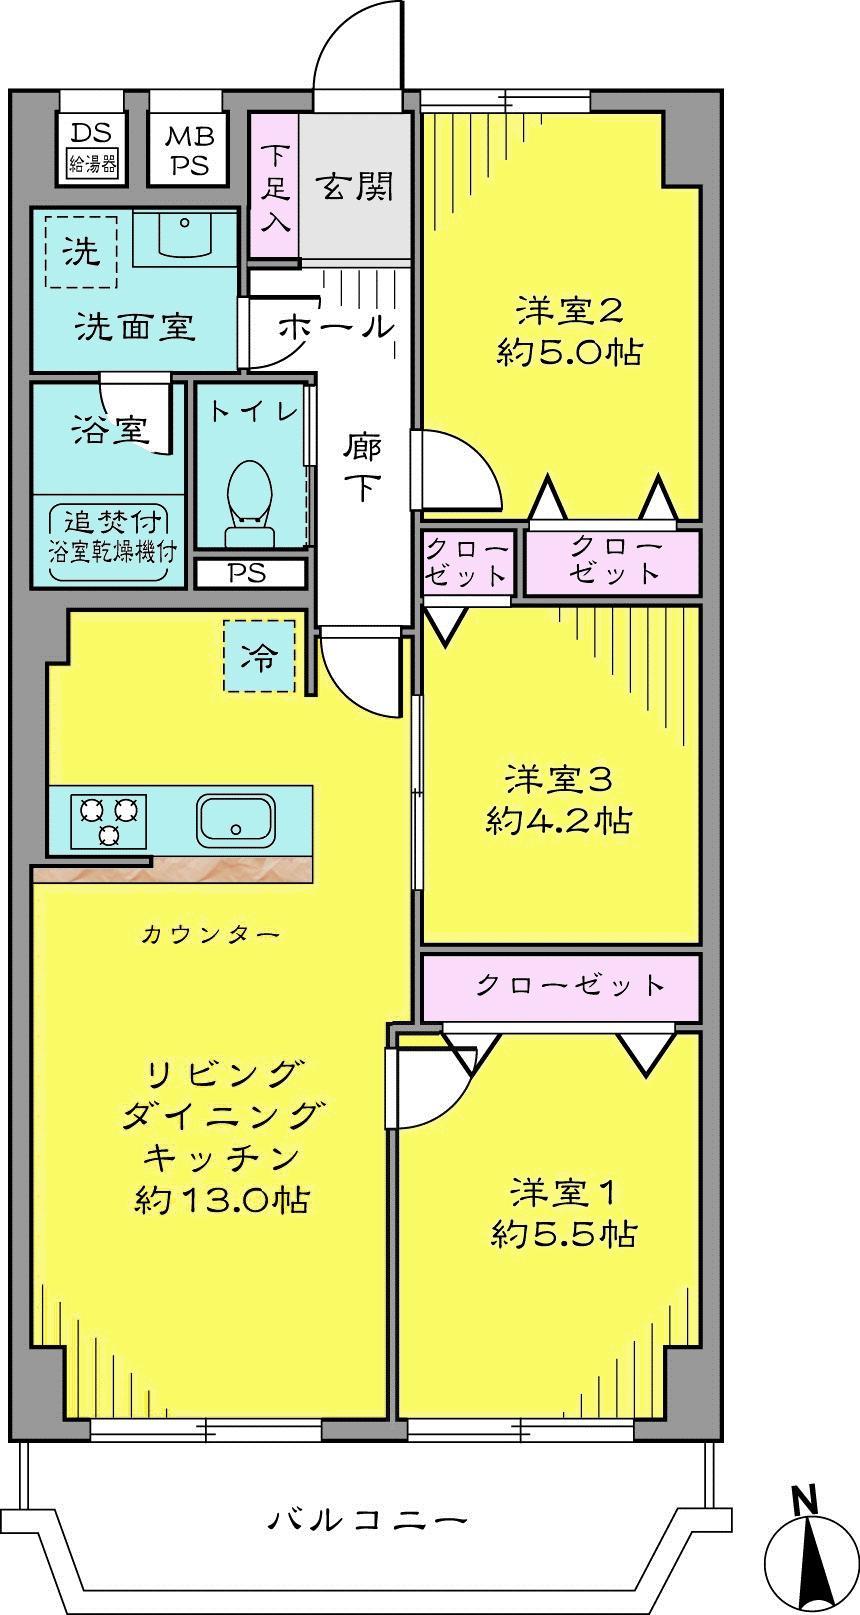 Floor plan. 3LDK, Price 32,800,000 yen, Footprint 61.6 sq m , Balcony area 7.6 sq m ◎ 61.60 of sq m 3LDK ◎ face-to-face counter kitchen ◎ management system good